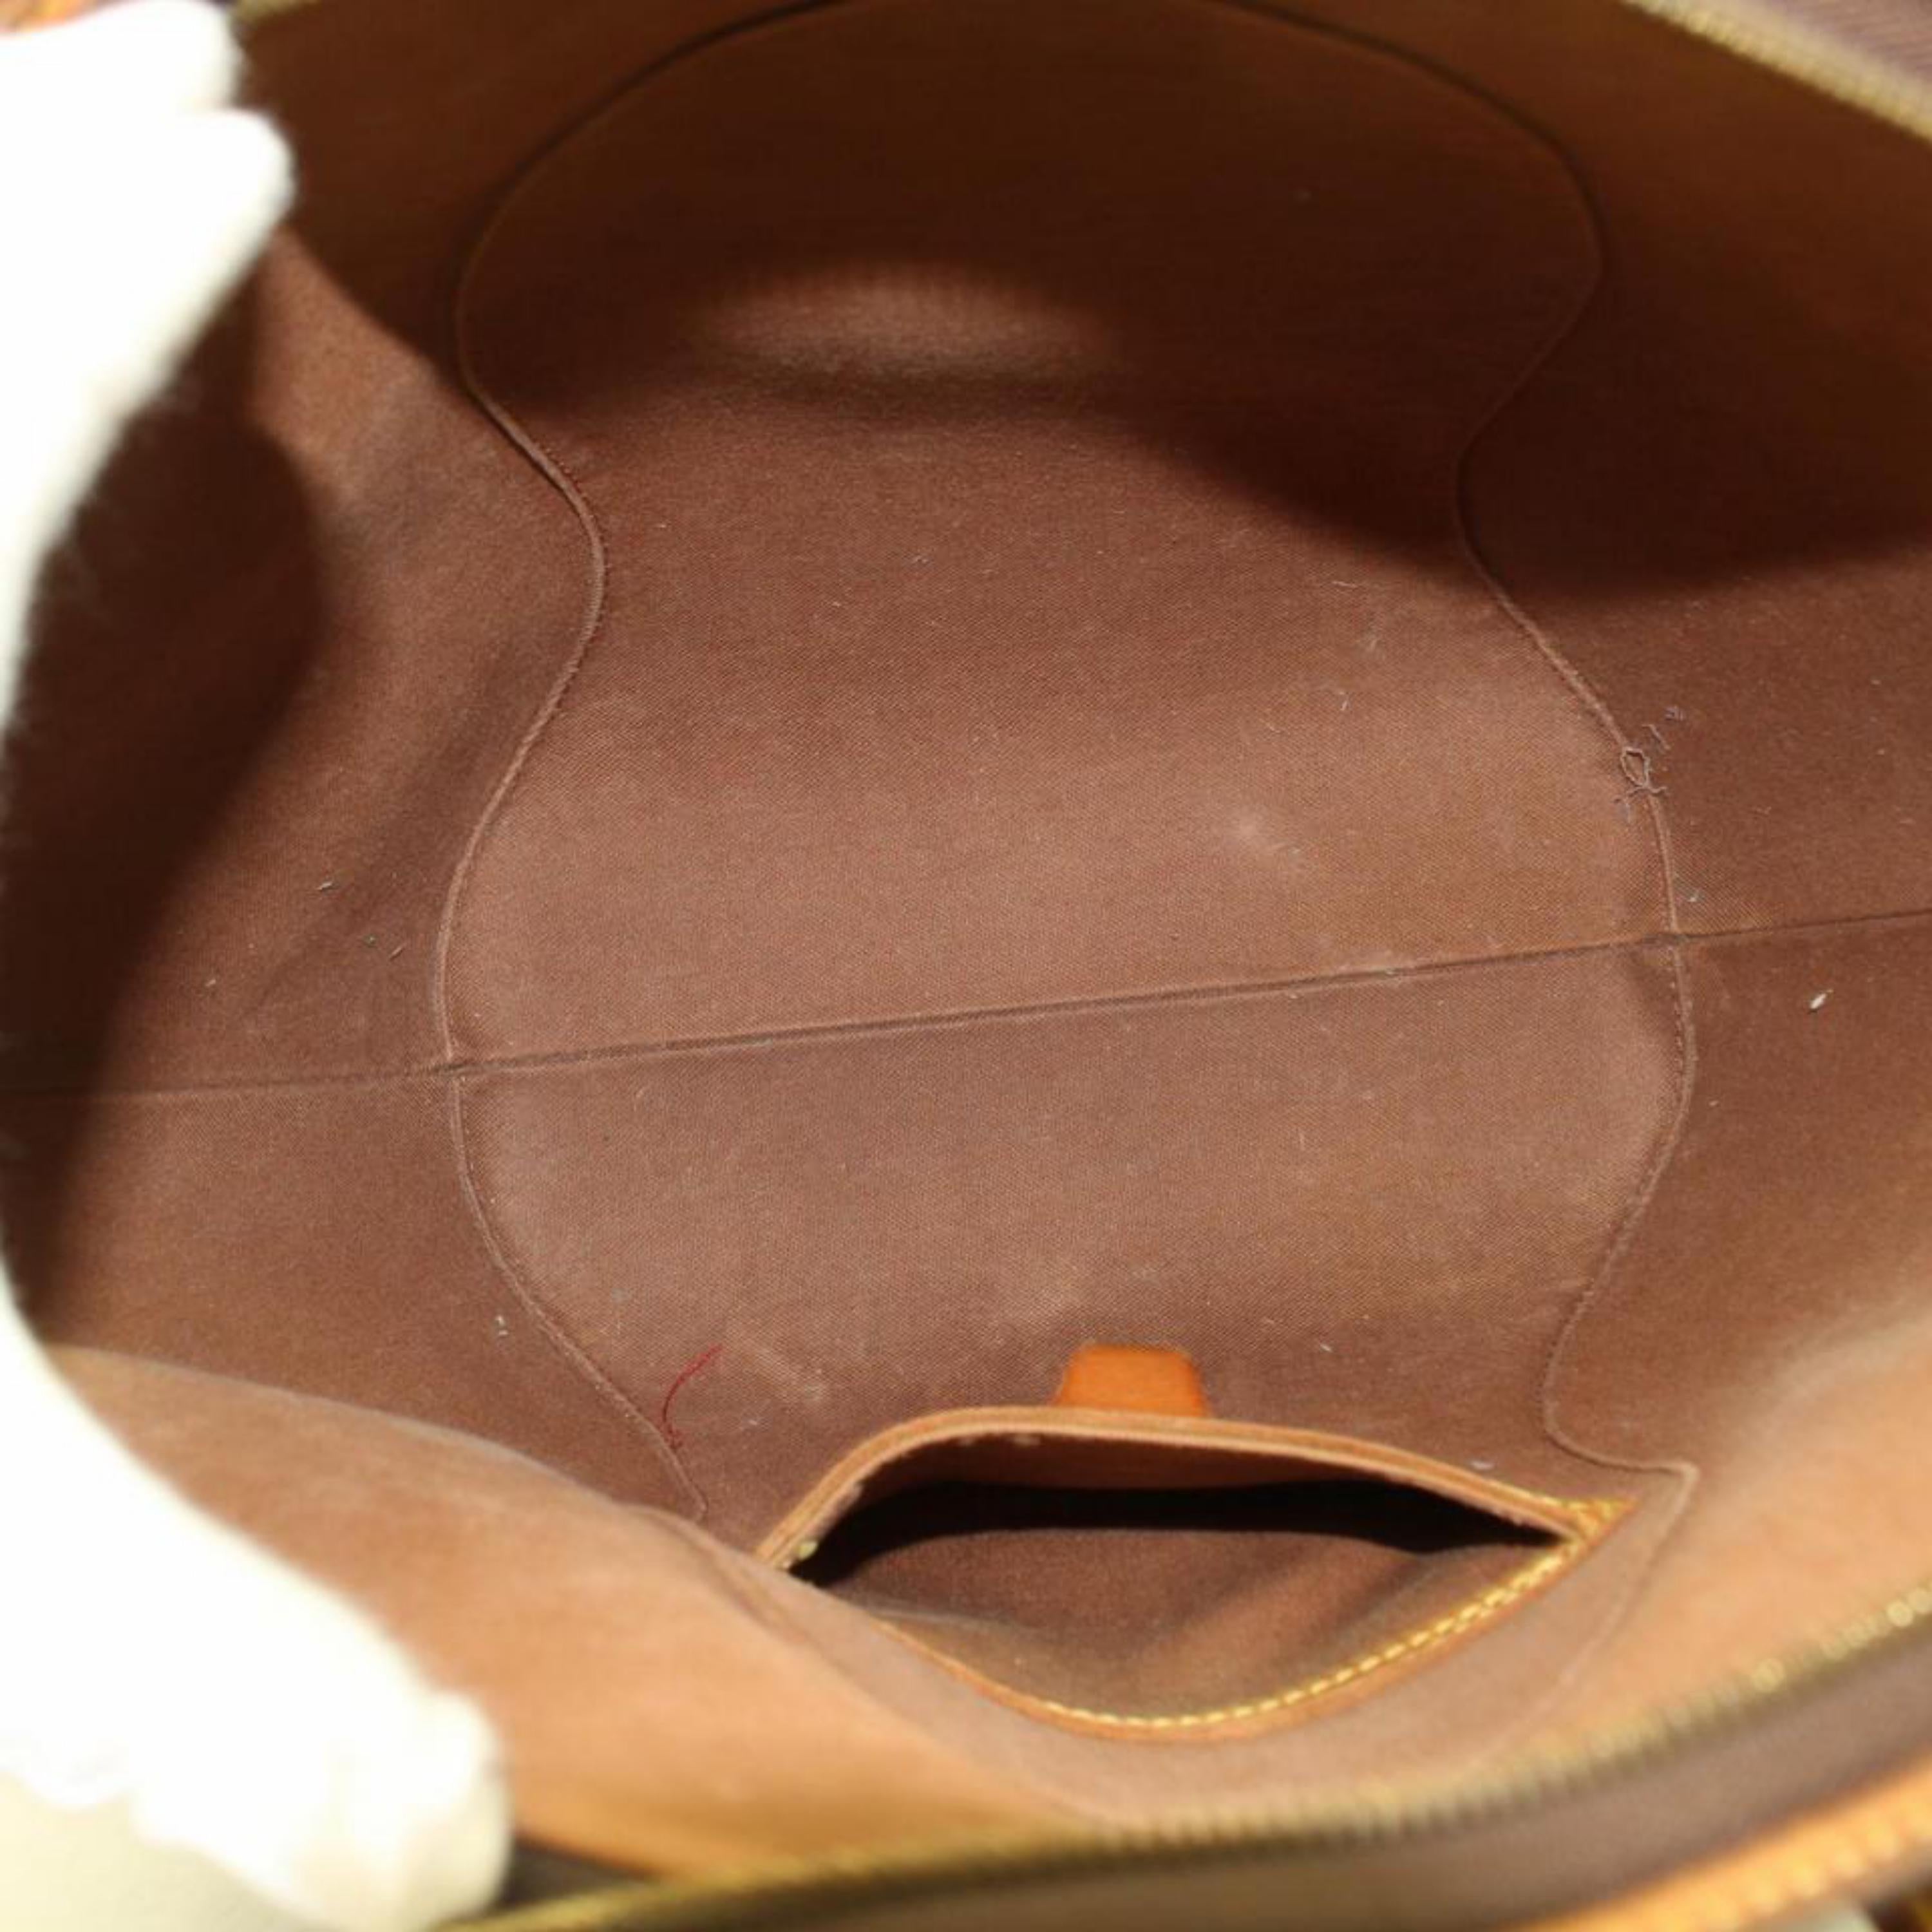 Louis Vuitton Ellipse Monogram Mm Bowler Octagon 869465 Brown Coated Canvas Satc In Good Condition For Sale In Forest Hills, NY